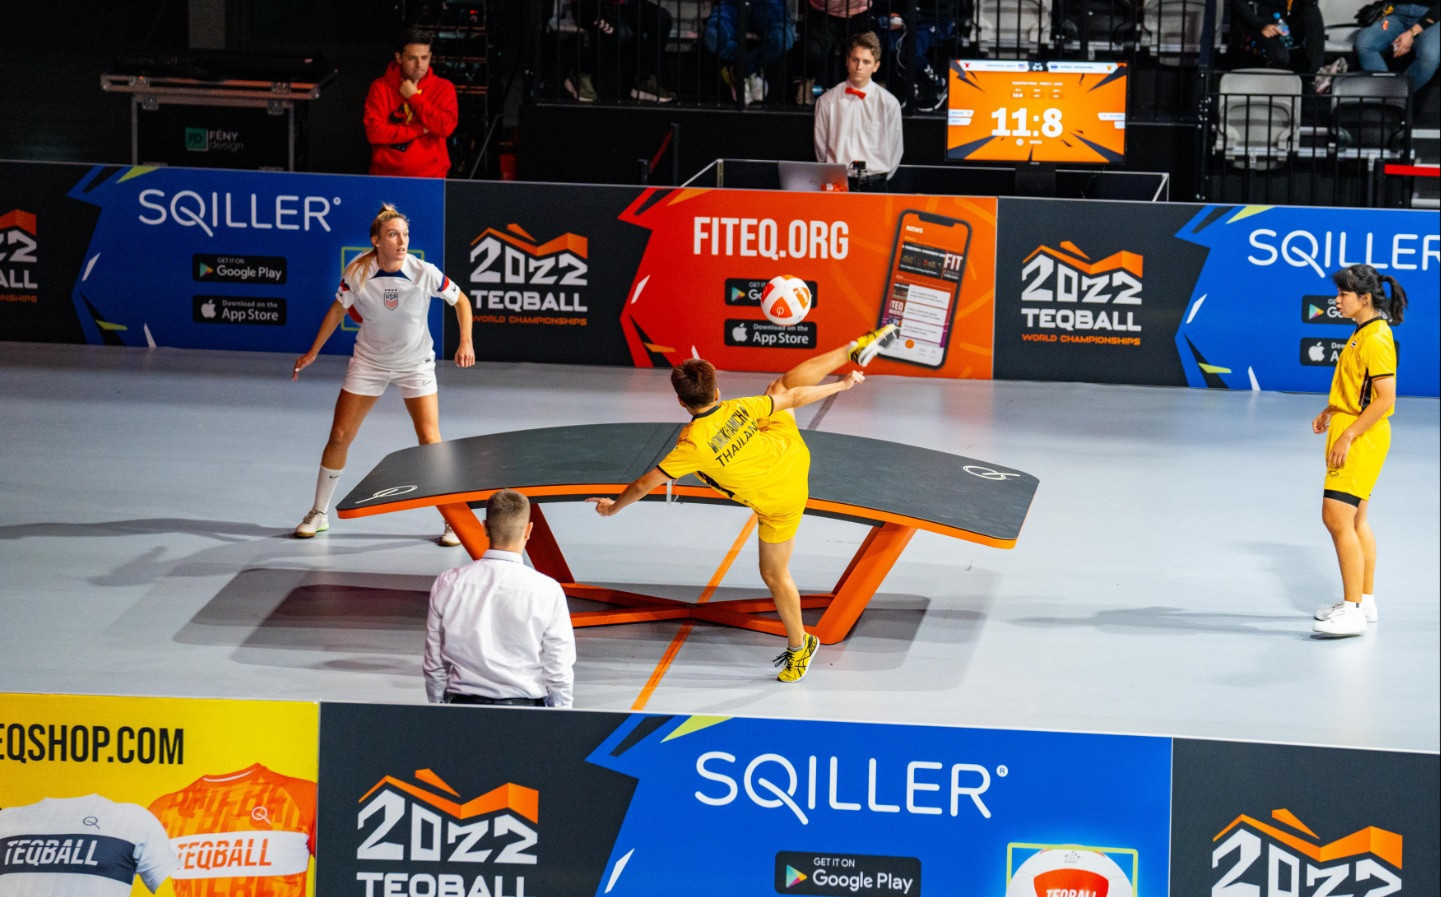 DafaNews provided coverage for the Teqball World Championships in Nuremburg in October last year ©FITEQ